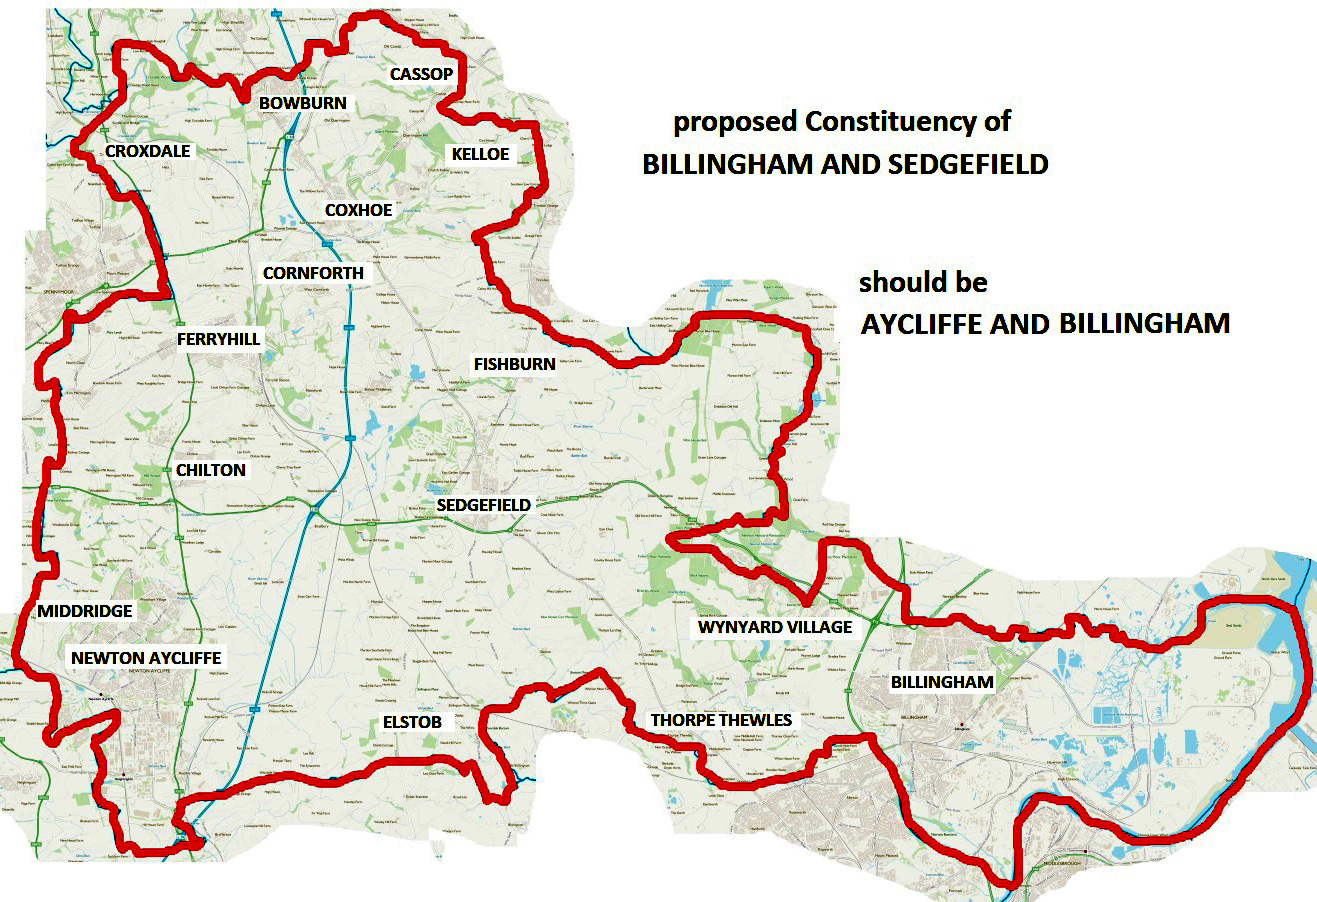 Bid to Change Name of New Constituency Boundary